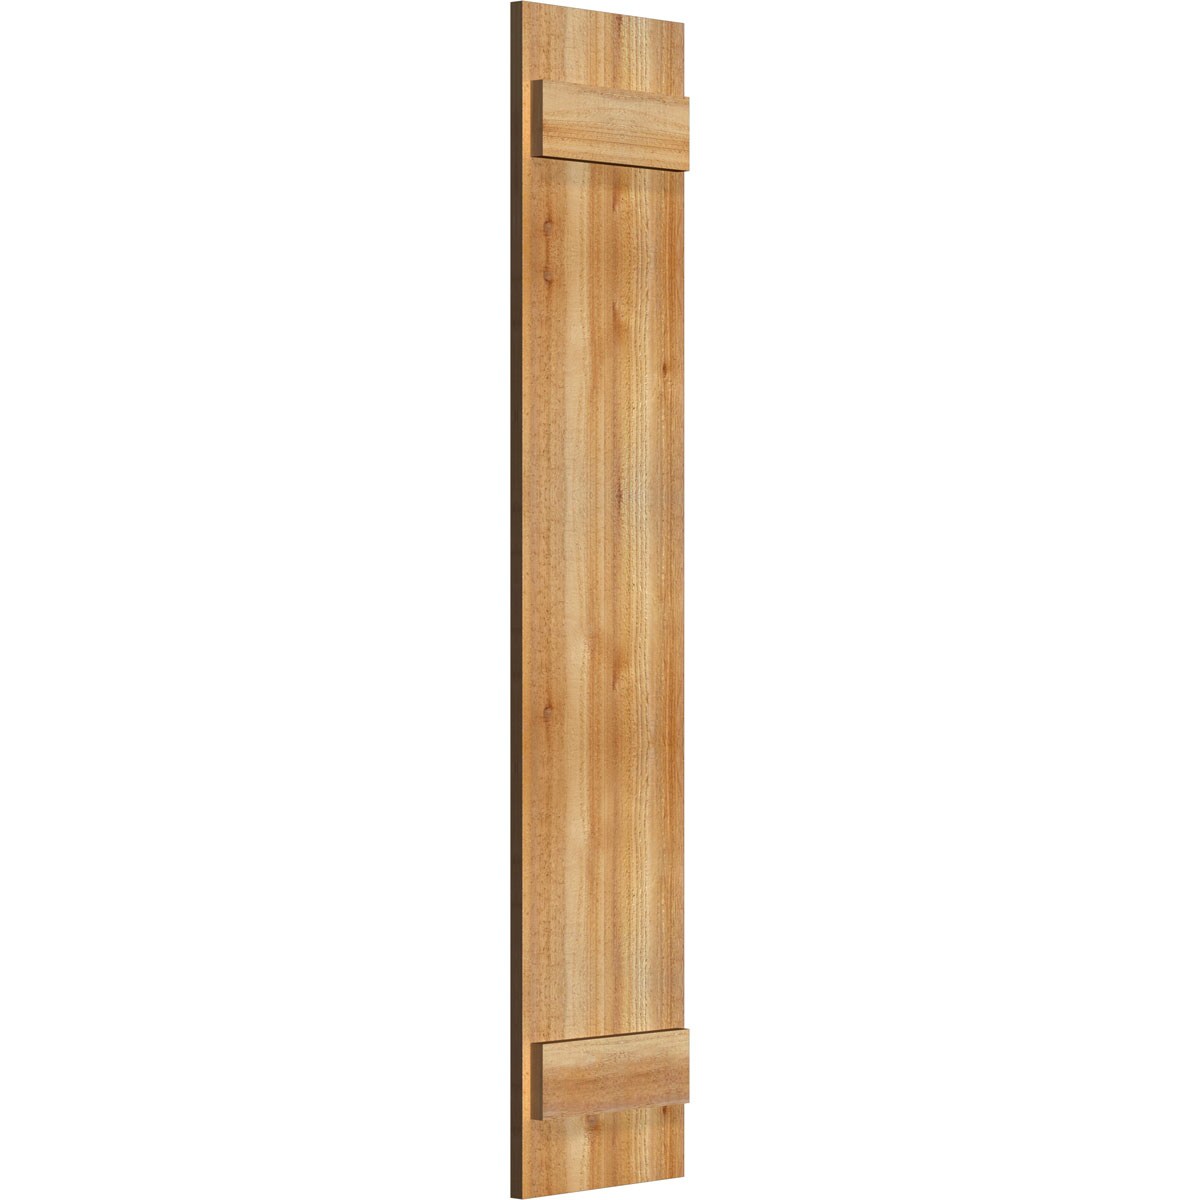 Ekena Millwork 2-Pack 10.75-in W x 53-in H Unfinished Board and Batten Wood Western Red cedar Exterior Shutters